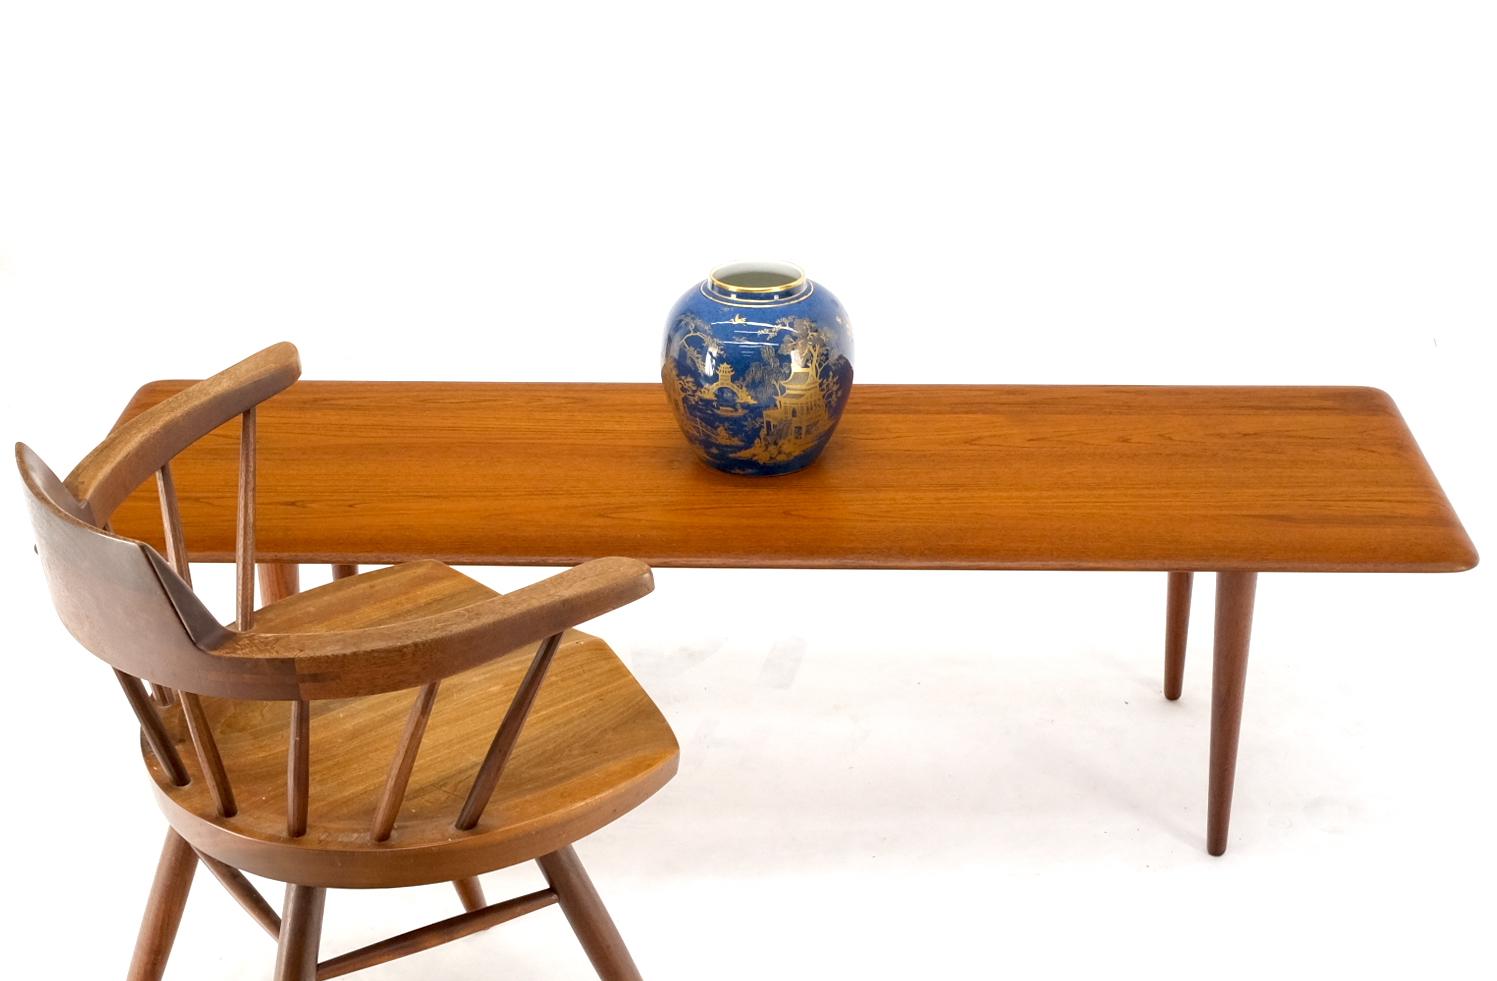 Danish Mid-Century Modern Solid Teak Rectangle Coffee Table Tapered Dowel Legs In Excellent Condition For Sale In Rockaway, NJ